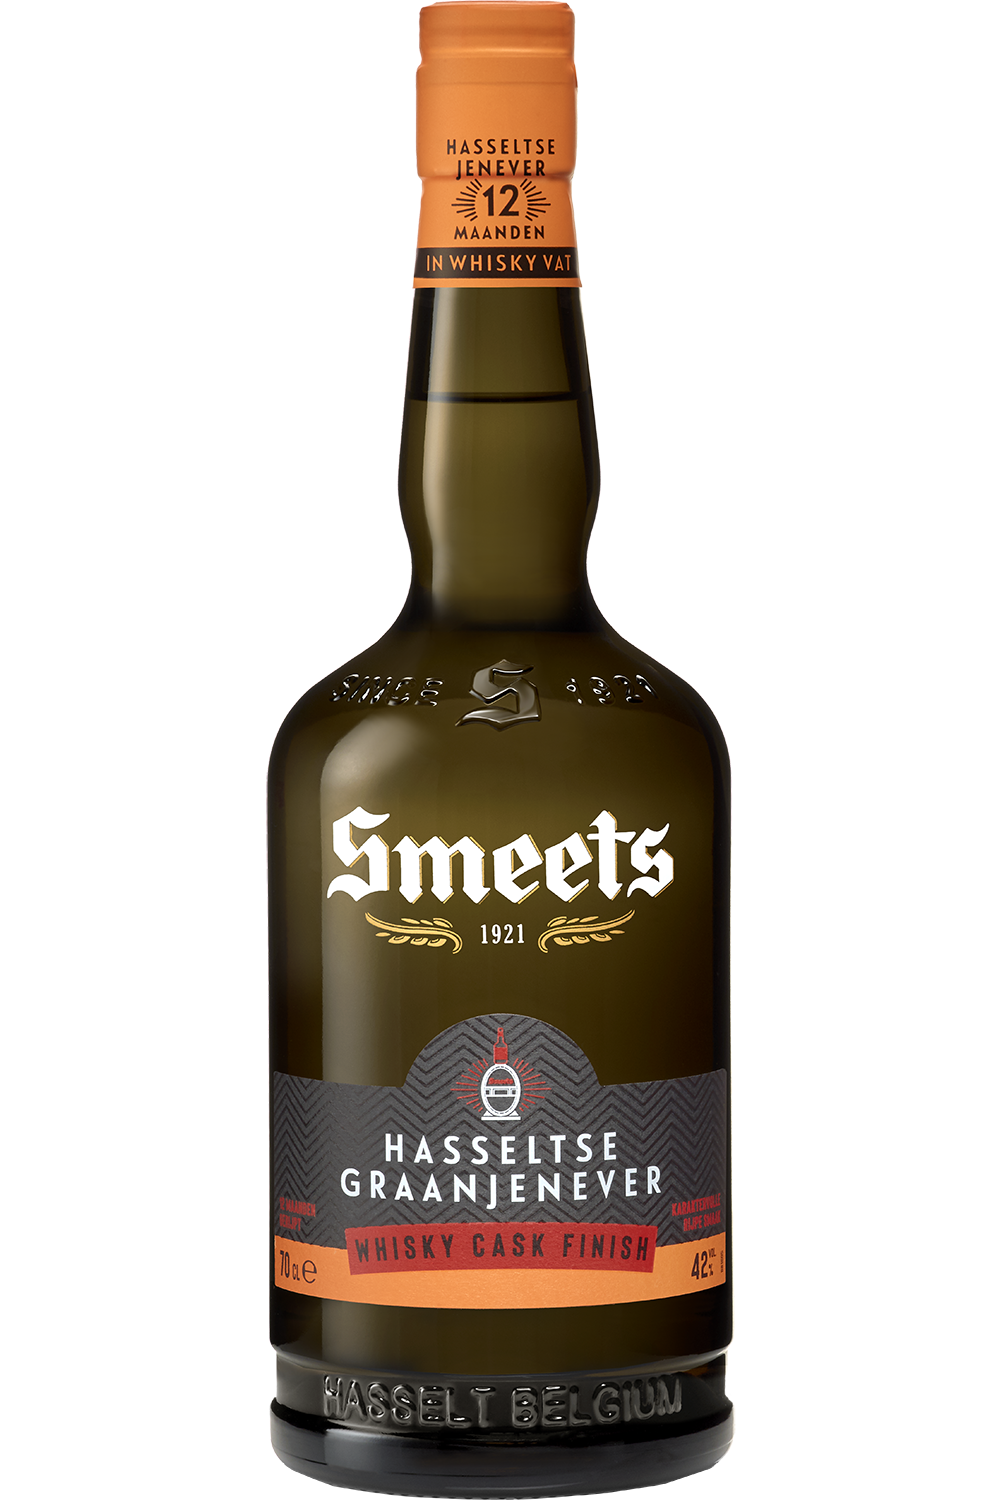 Smeets Whisky Cask Finish 